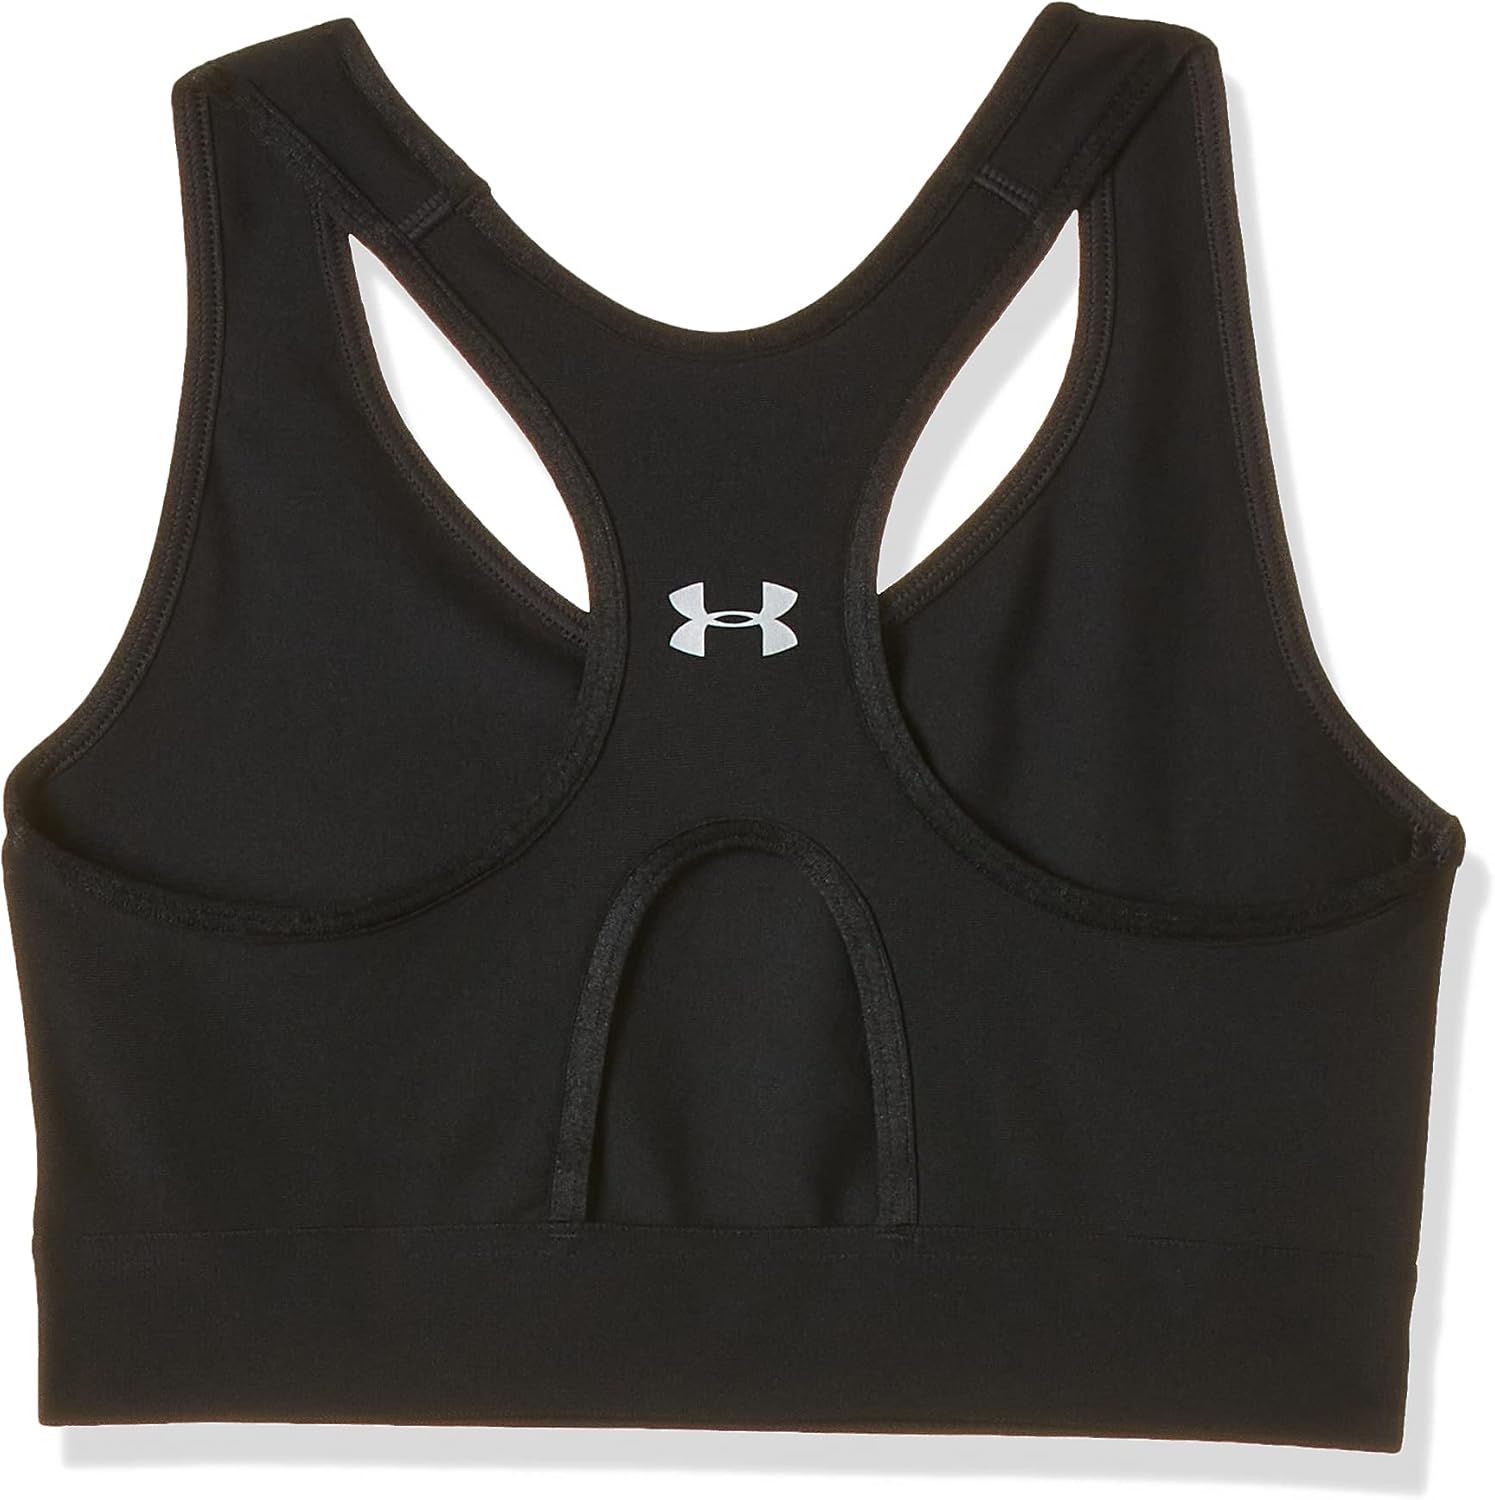 Under Armour Women's Mid Keyhole High Support Sports Bra with Removable Cups, Light & Breathable Run | Amazon (UK)